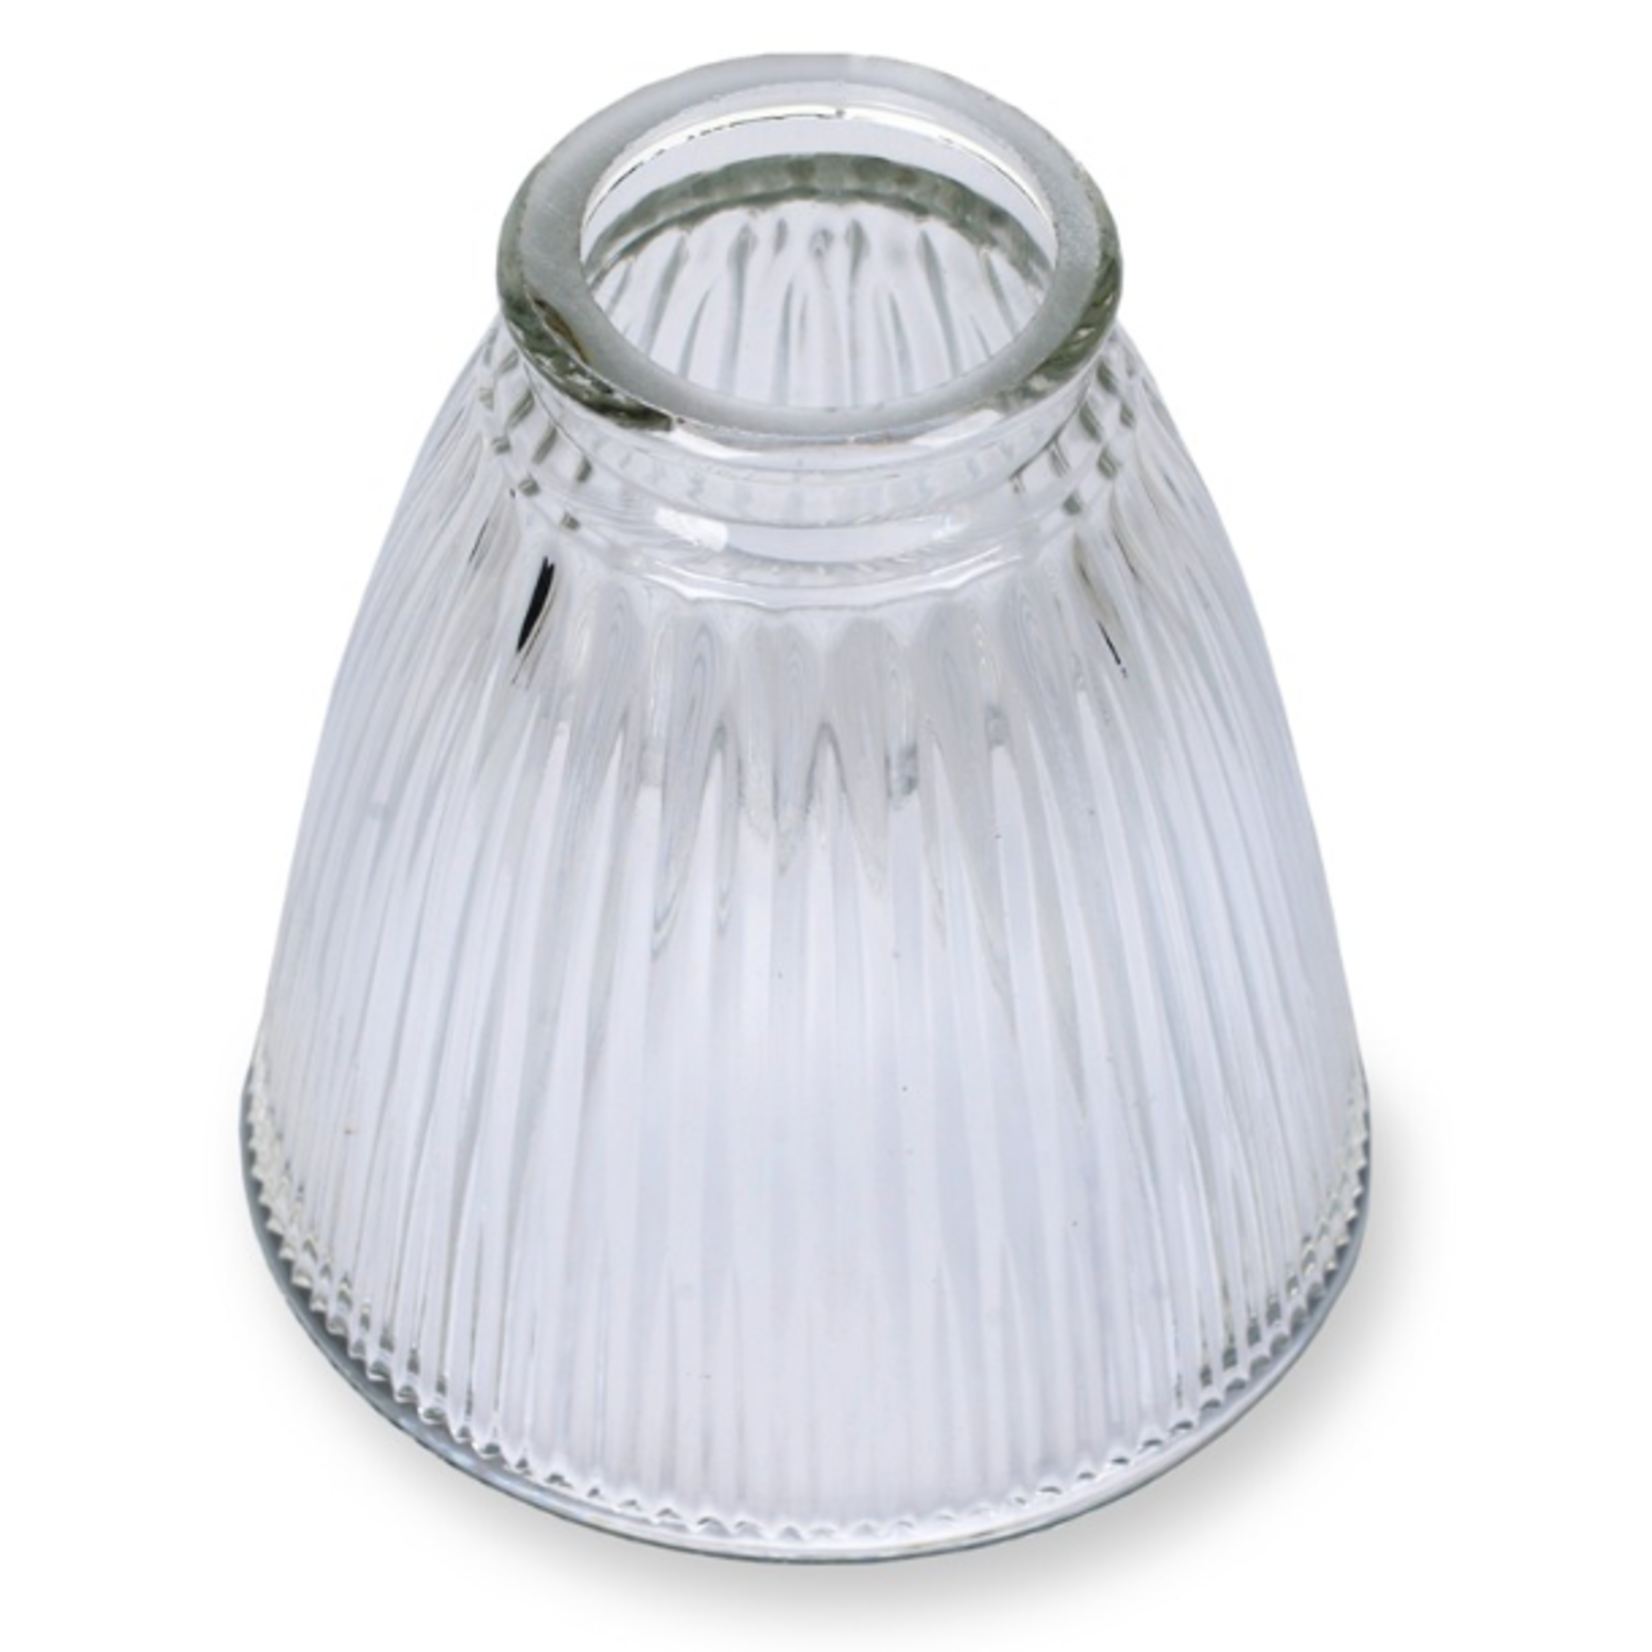 GT Tiny Glass Shade only - choose Lampholder flex and rose or Replacement Glass for Paris/Pimlico Lights